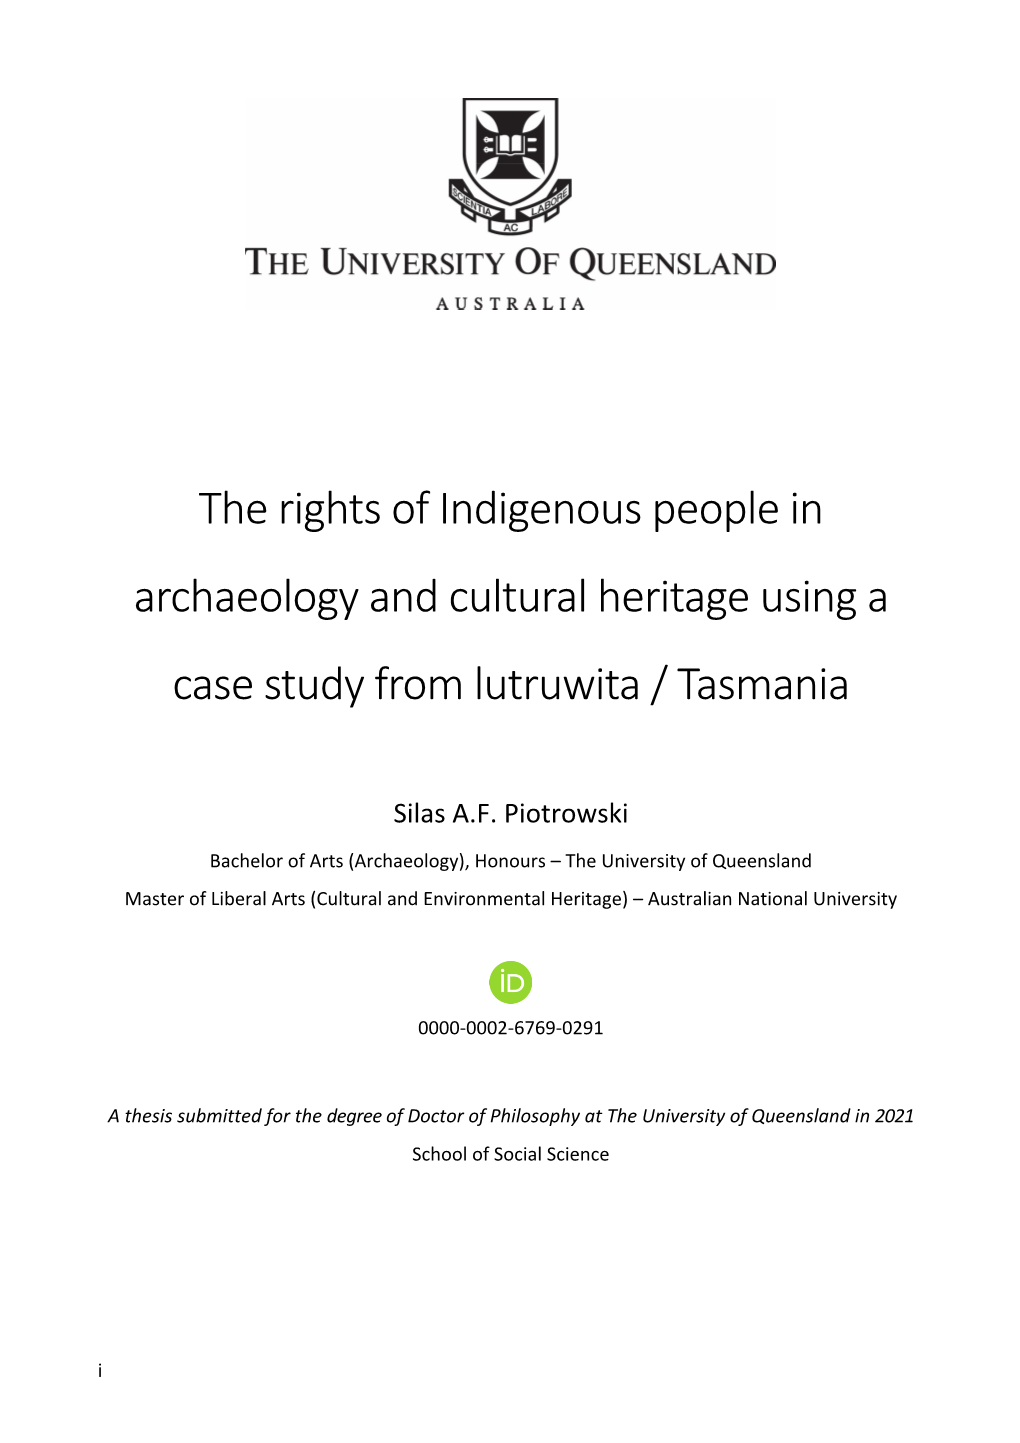 The Rights of Indigenous People in Archaeology and Cultural Heritage Using a Case Study from Lutruwita / Tasmania